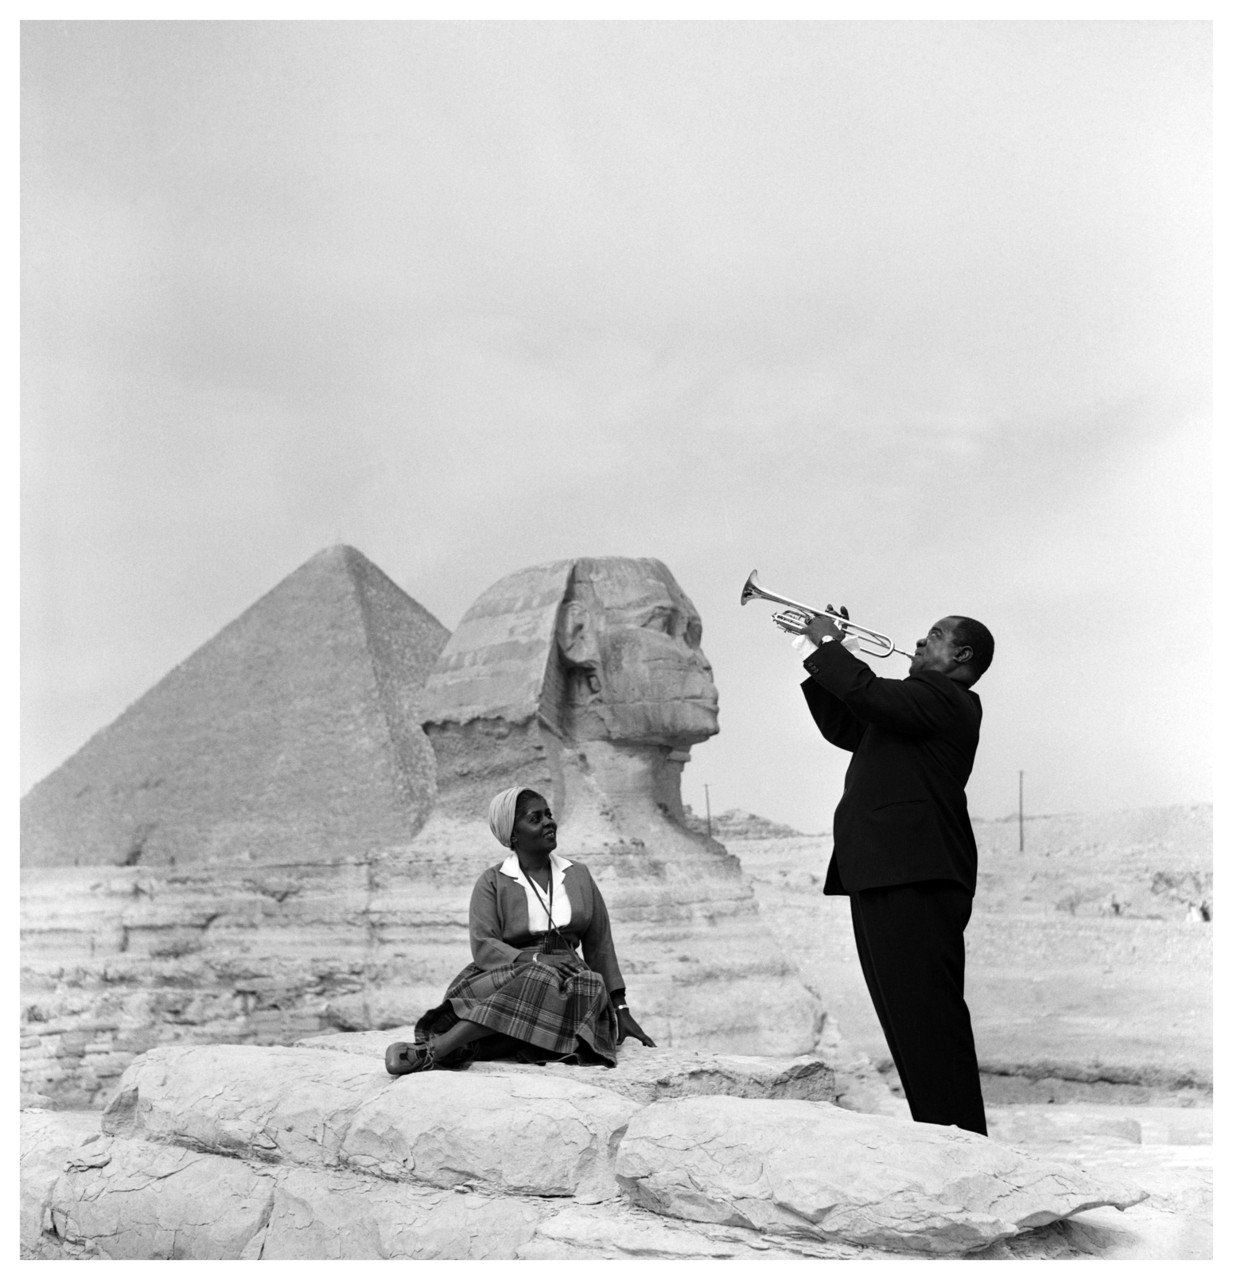 Louis Armstrong and his wife at the Pyramids in 1961